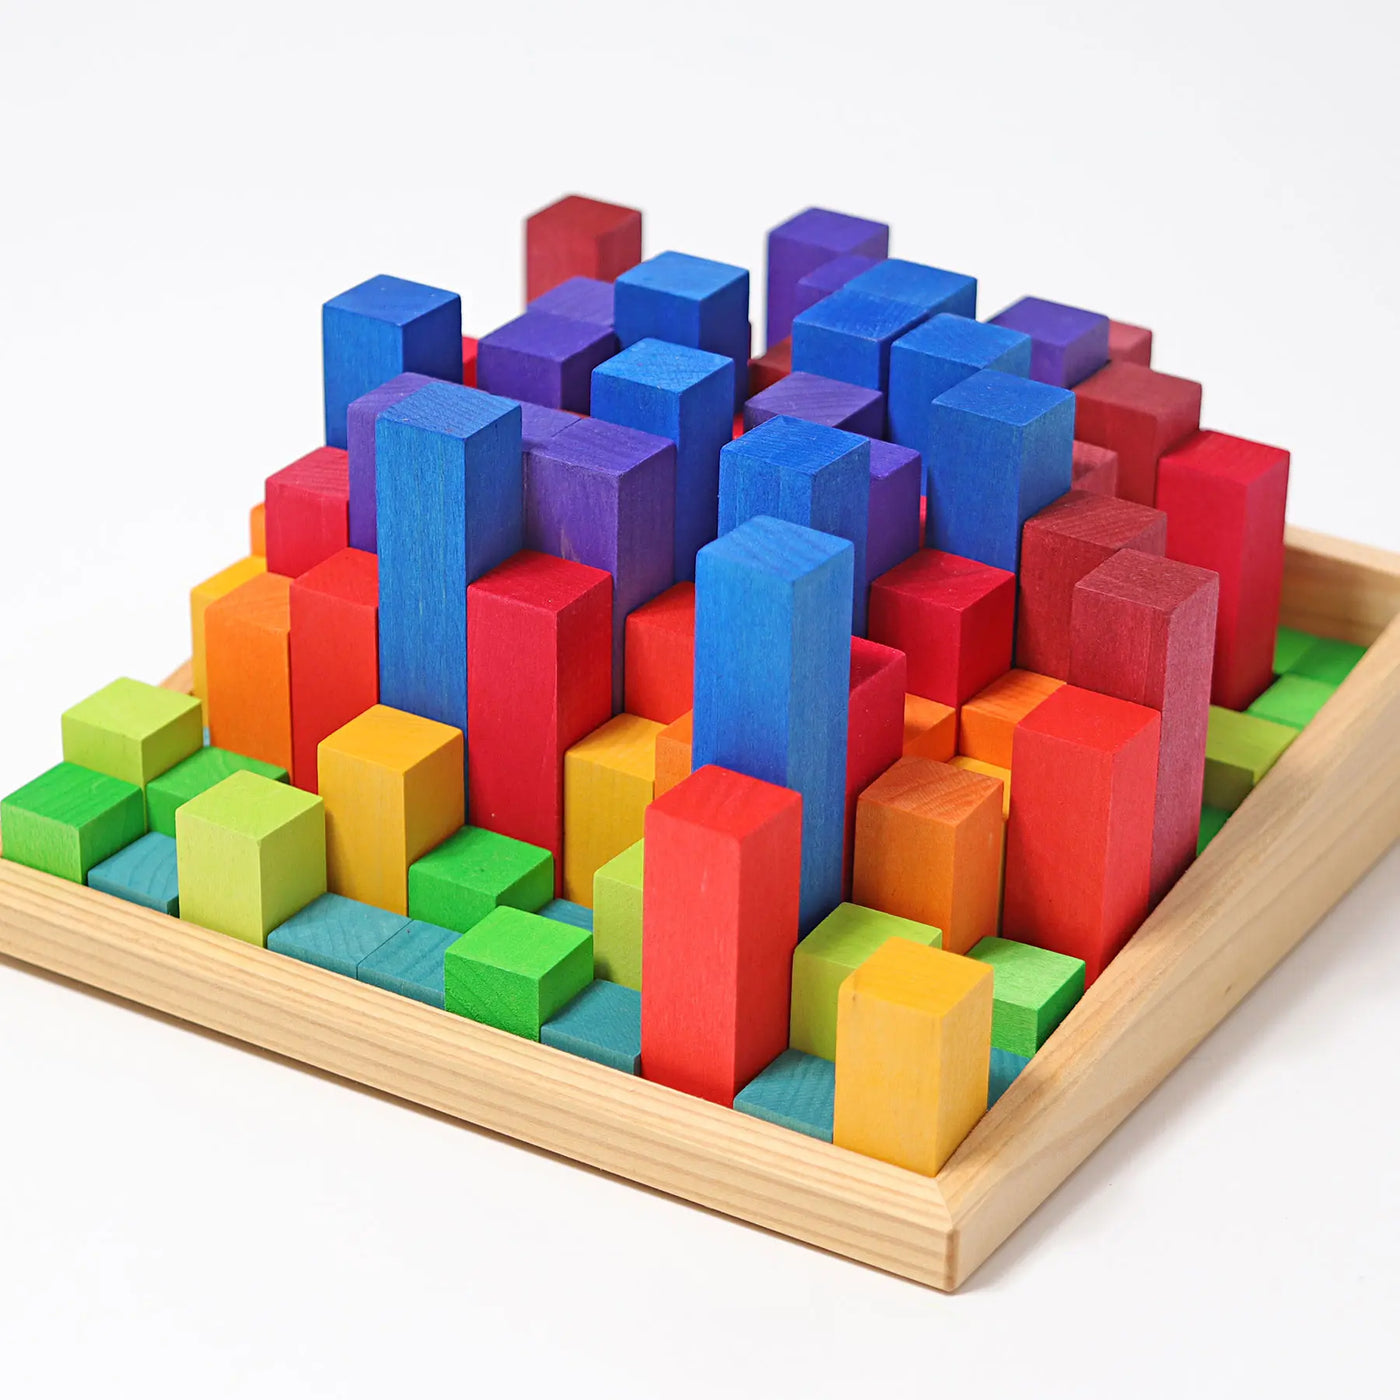 Large Stepped Counting Blocks